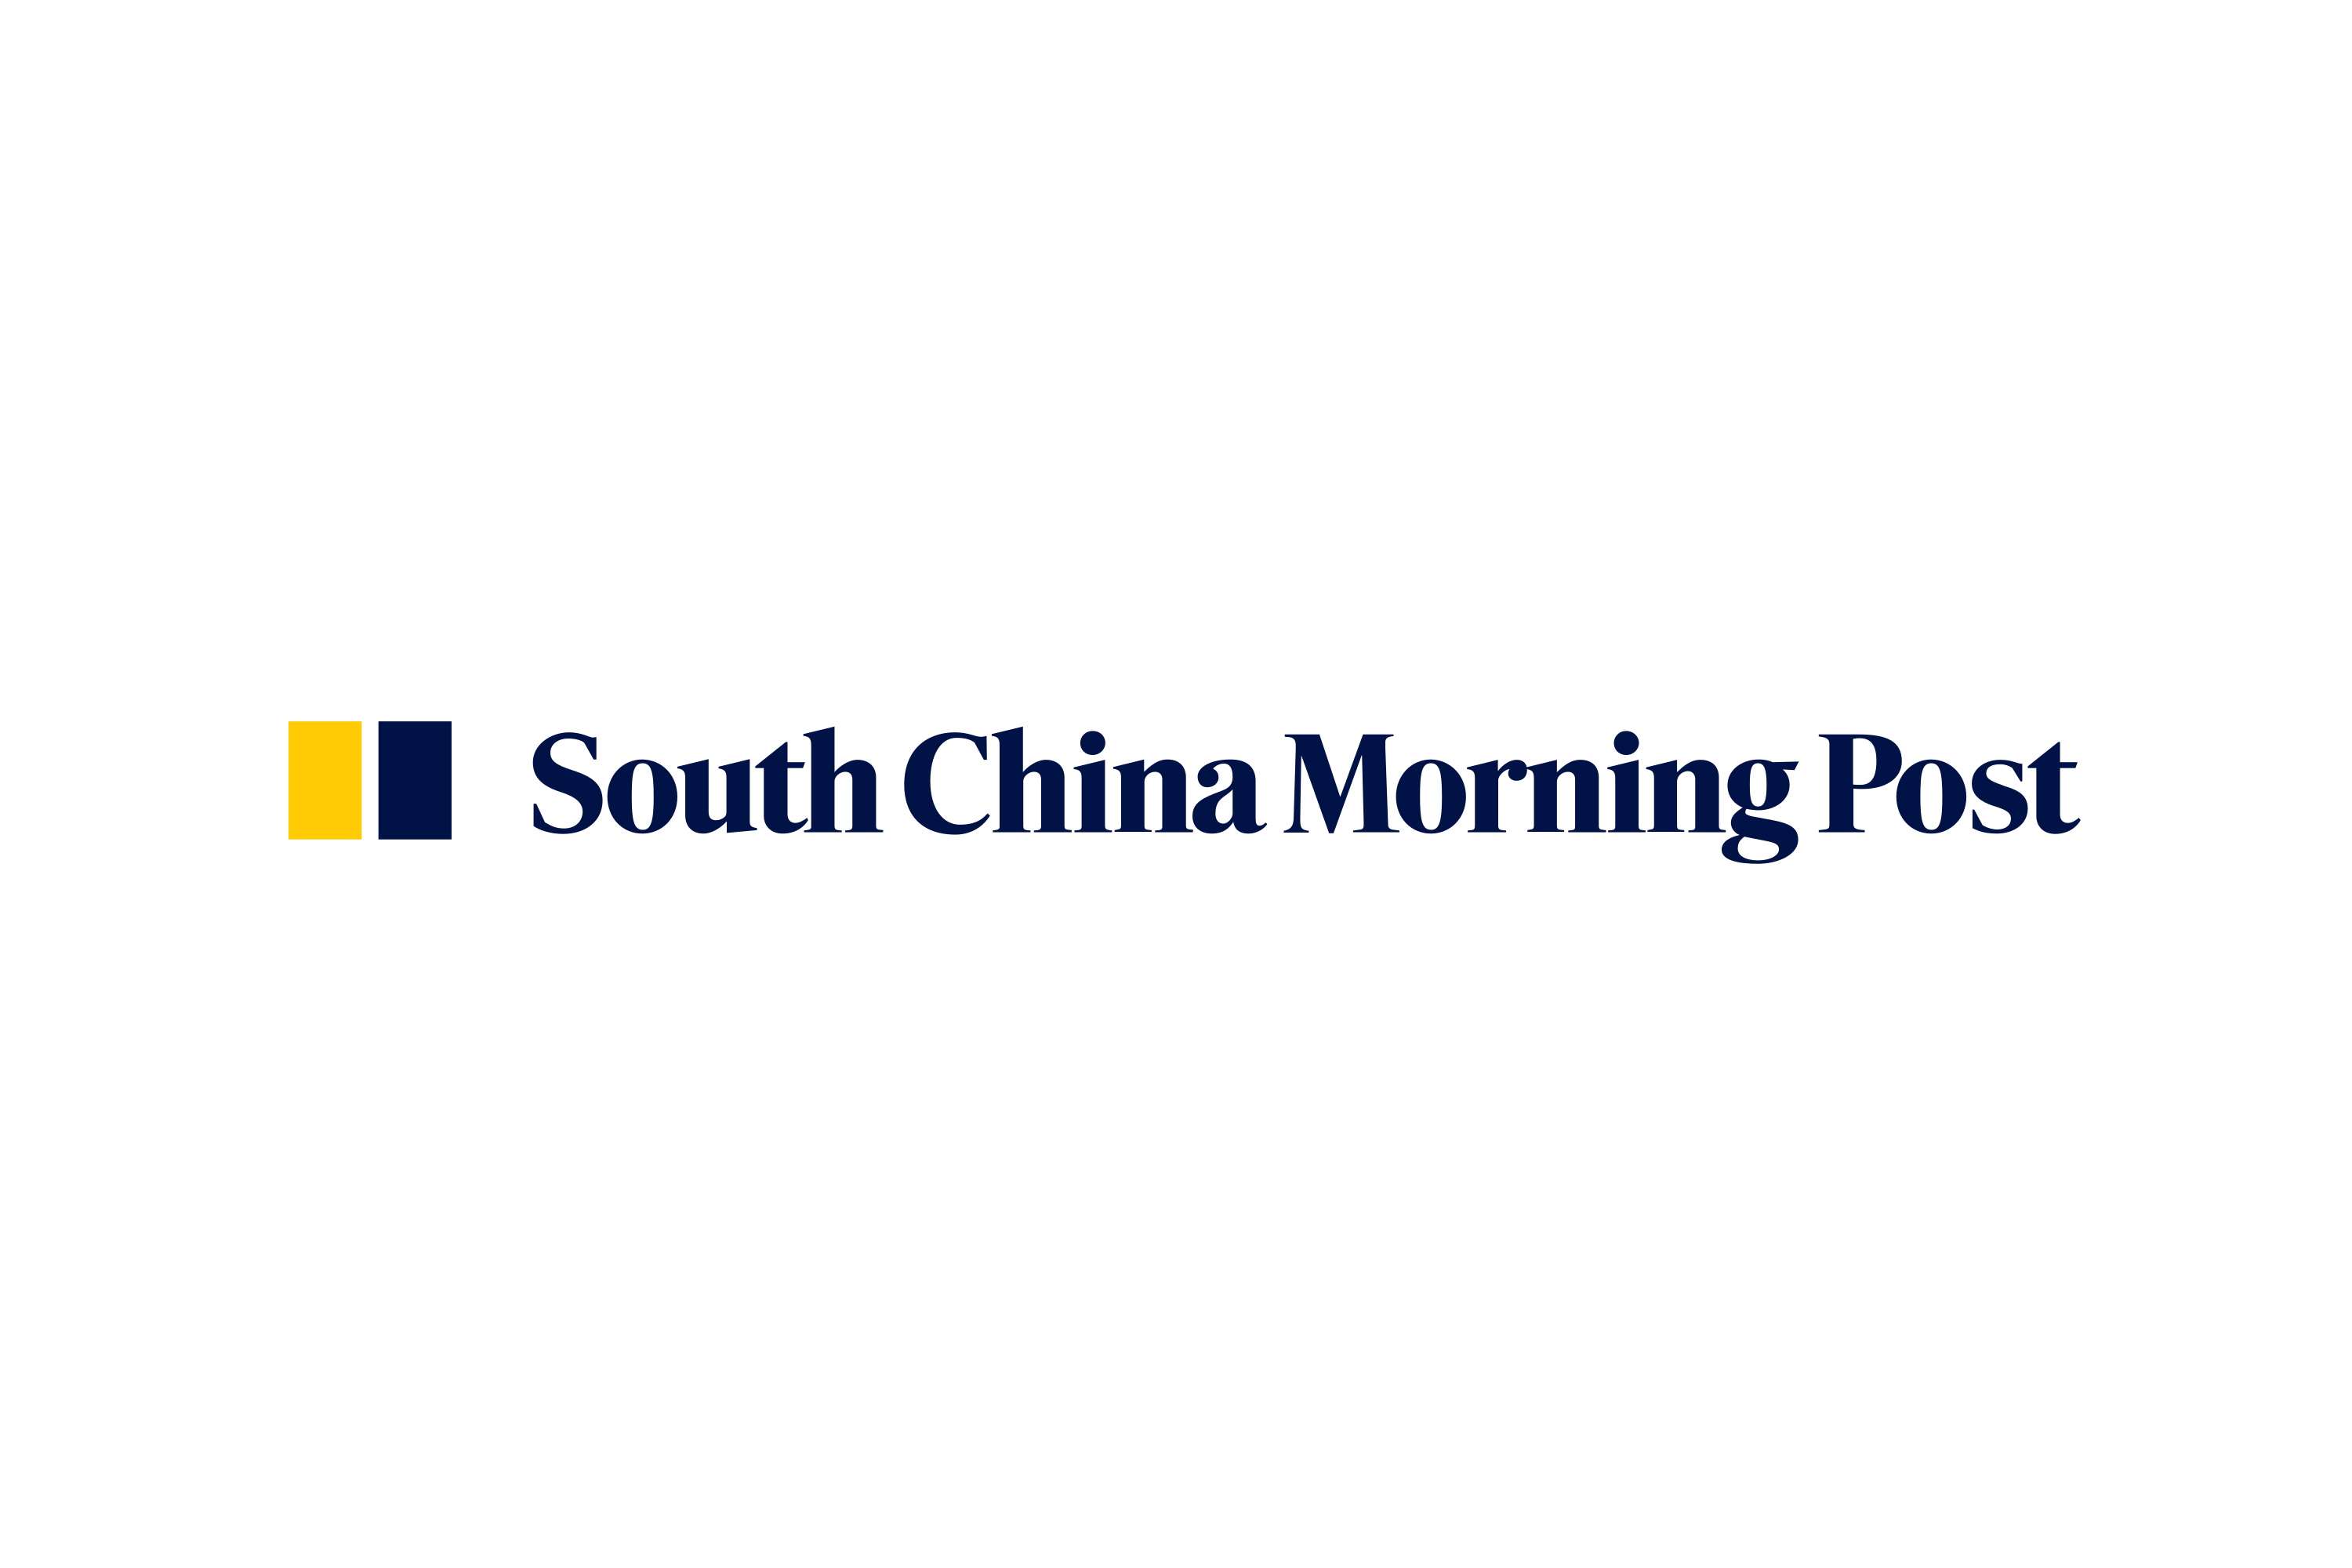 Comments on Anti-Asian Hate by Buck Gee, Committee of 100 Regional Chair, and Brian Sun, Committee of 100 Member, featured in South China Morning Post&#8230;